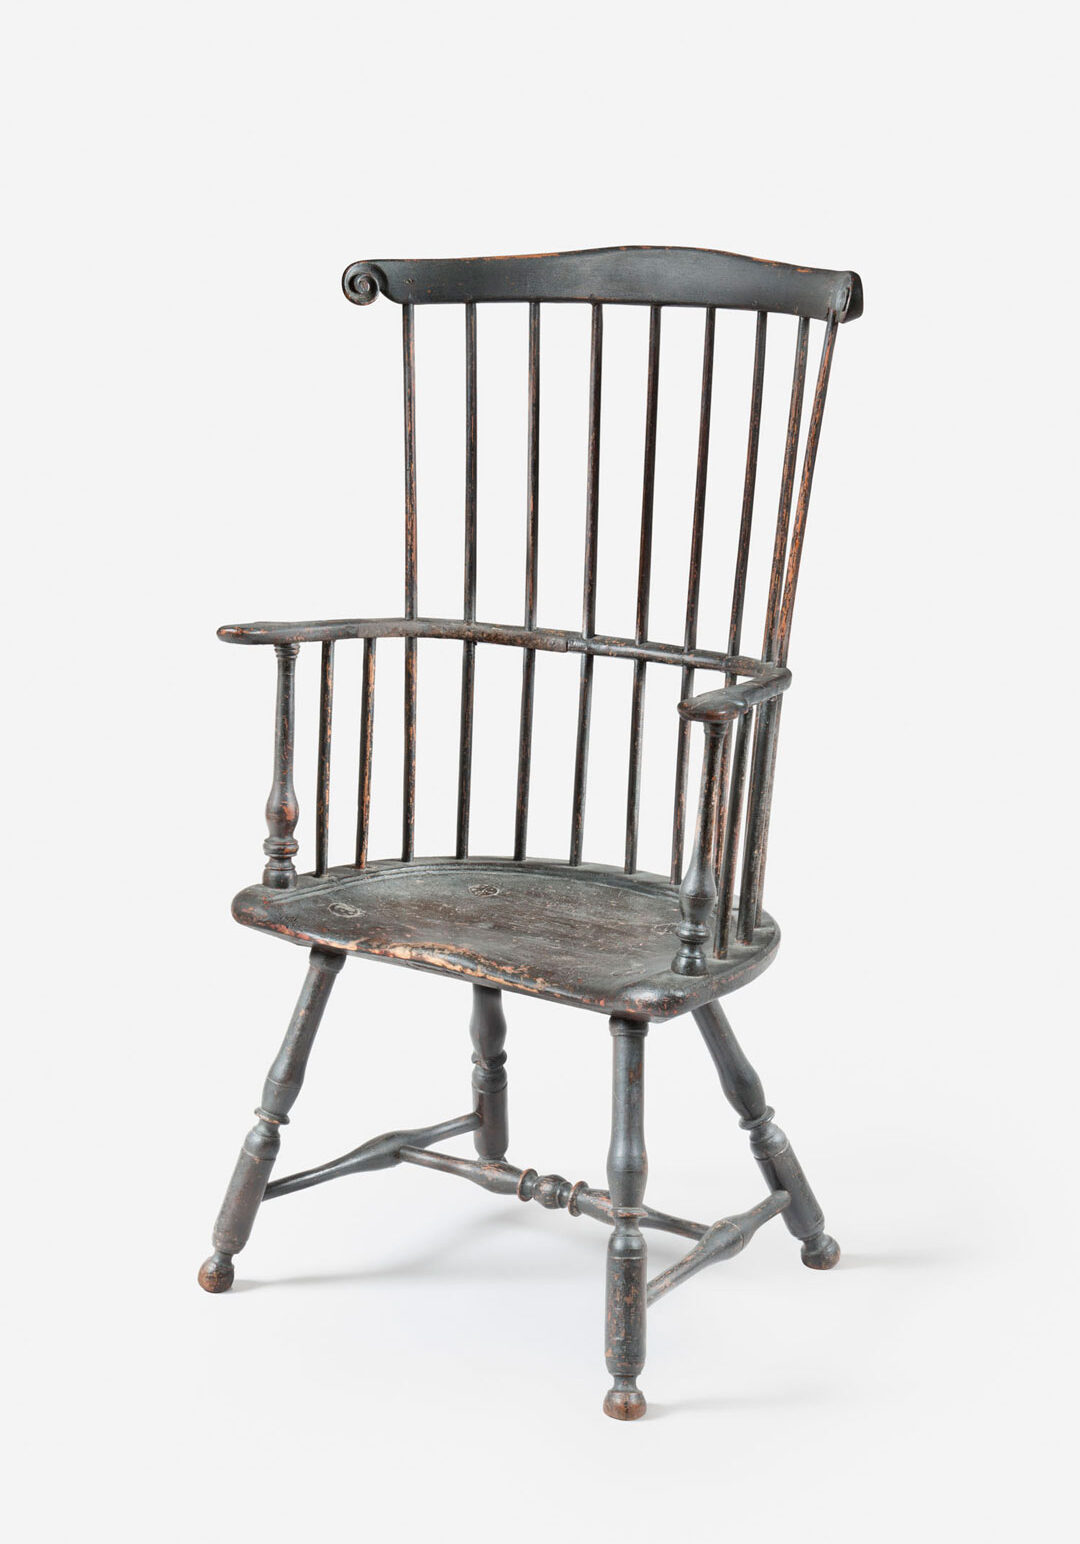 Windsor armchair branded by
Thomas Gilpin, Philadelphia,
1755–60. Collection of the
Dietrich American Foundation,
8.1.4.HRD.534